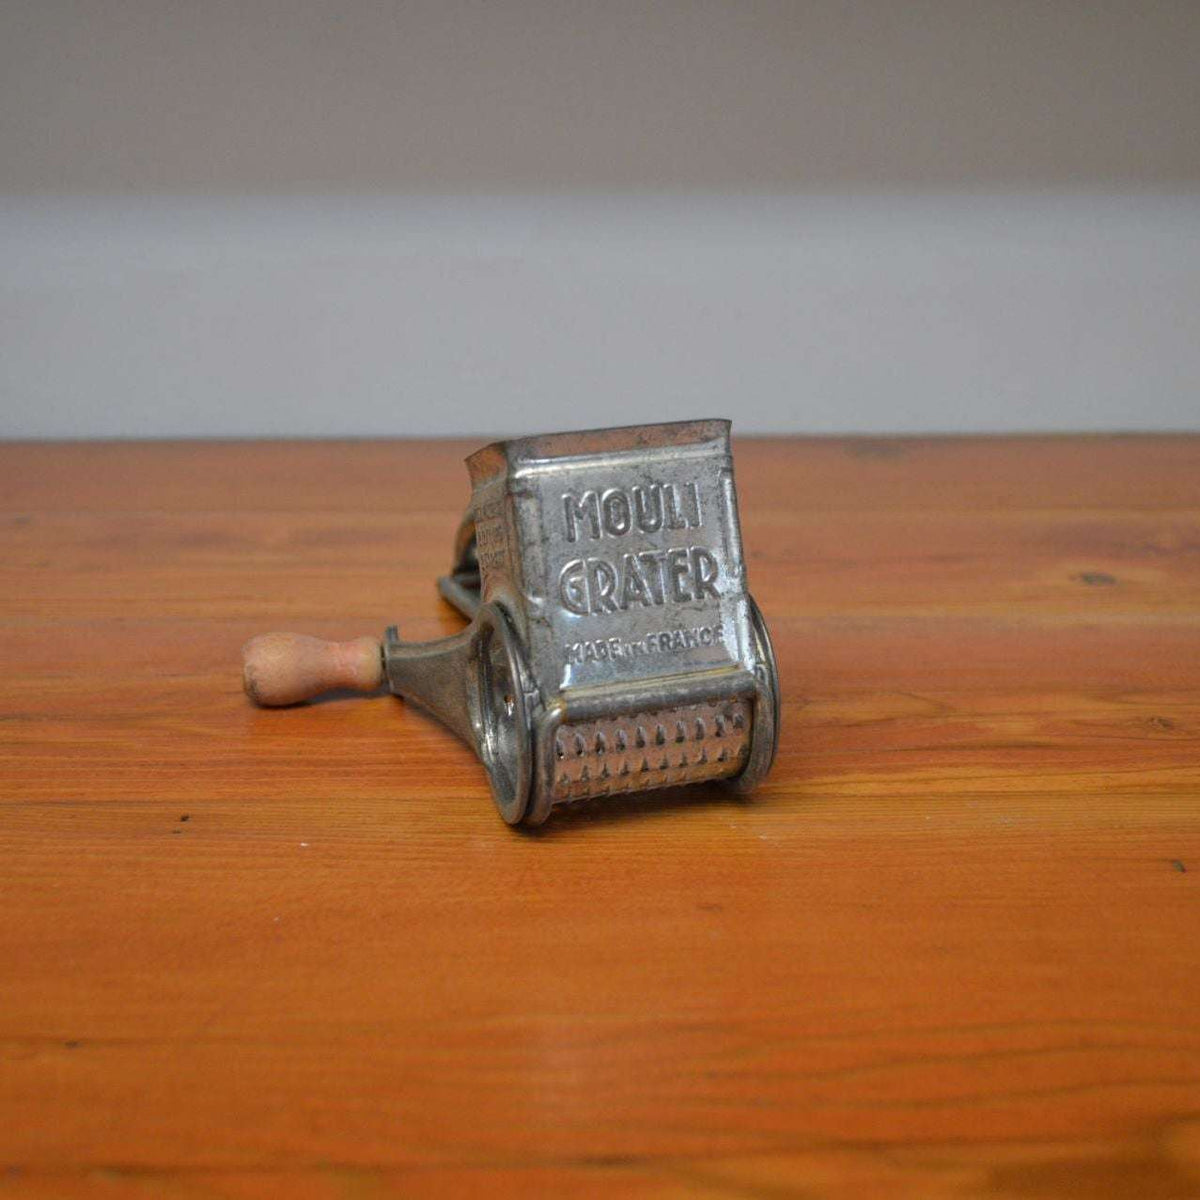 Vintage Mouli Cheese Grater  Vintage Mouli Cheese Grater 7 Long